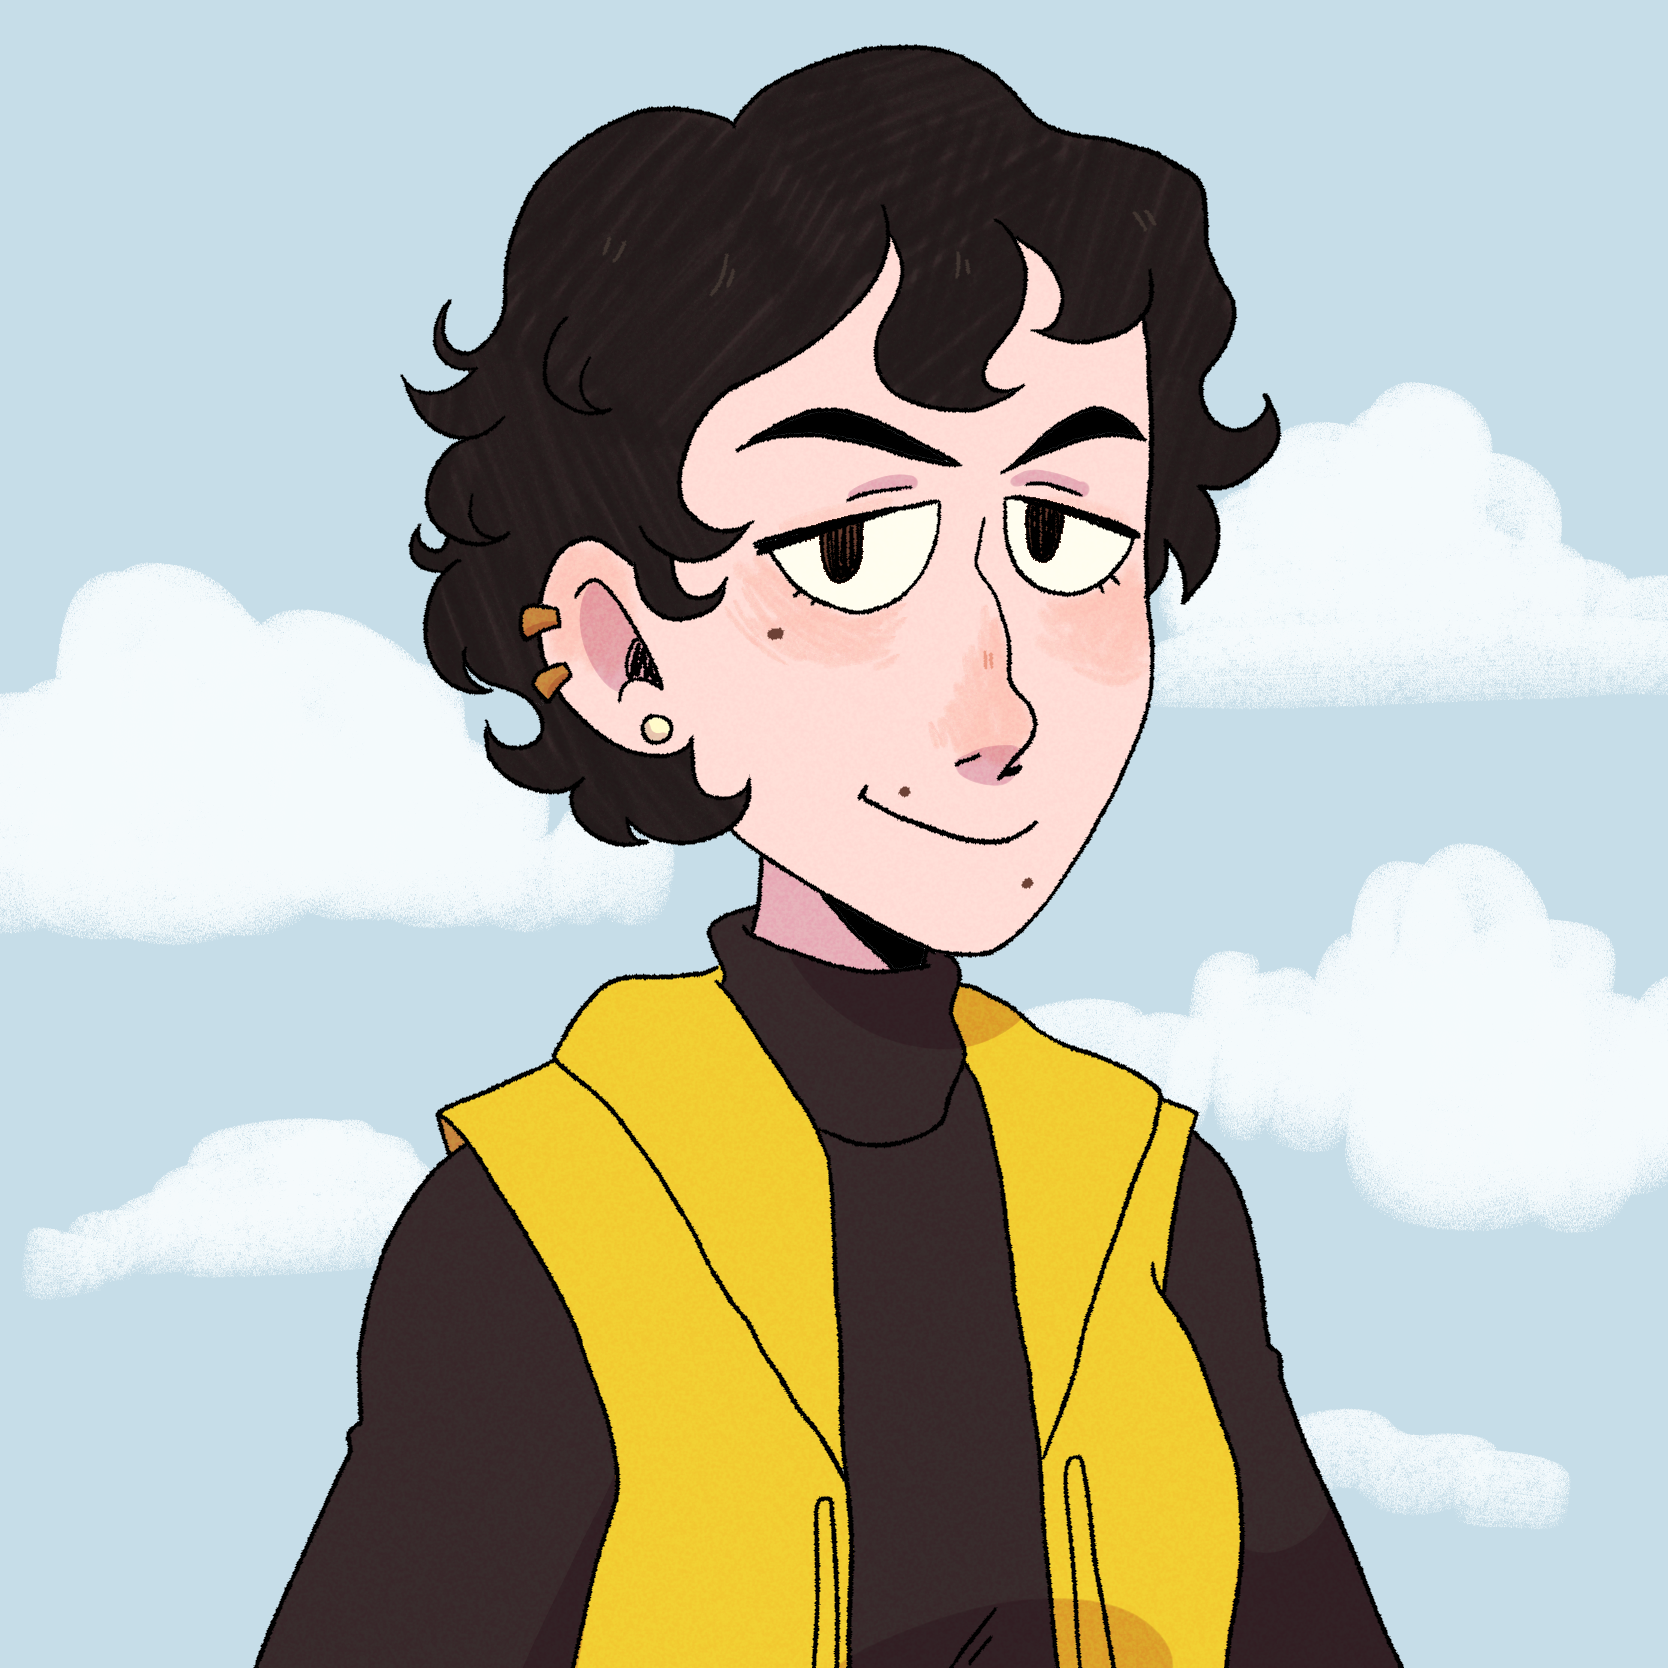 A drawing of a white person with short curly black hair and dark brown eyes smirking. They are wearing a black turtle neck under a yellow sleeveless hoodie. They have multiple moles on their face and multiple ear piercings. The  background is a pale blue sky with fluffy clouds.